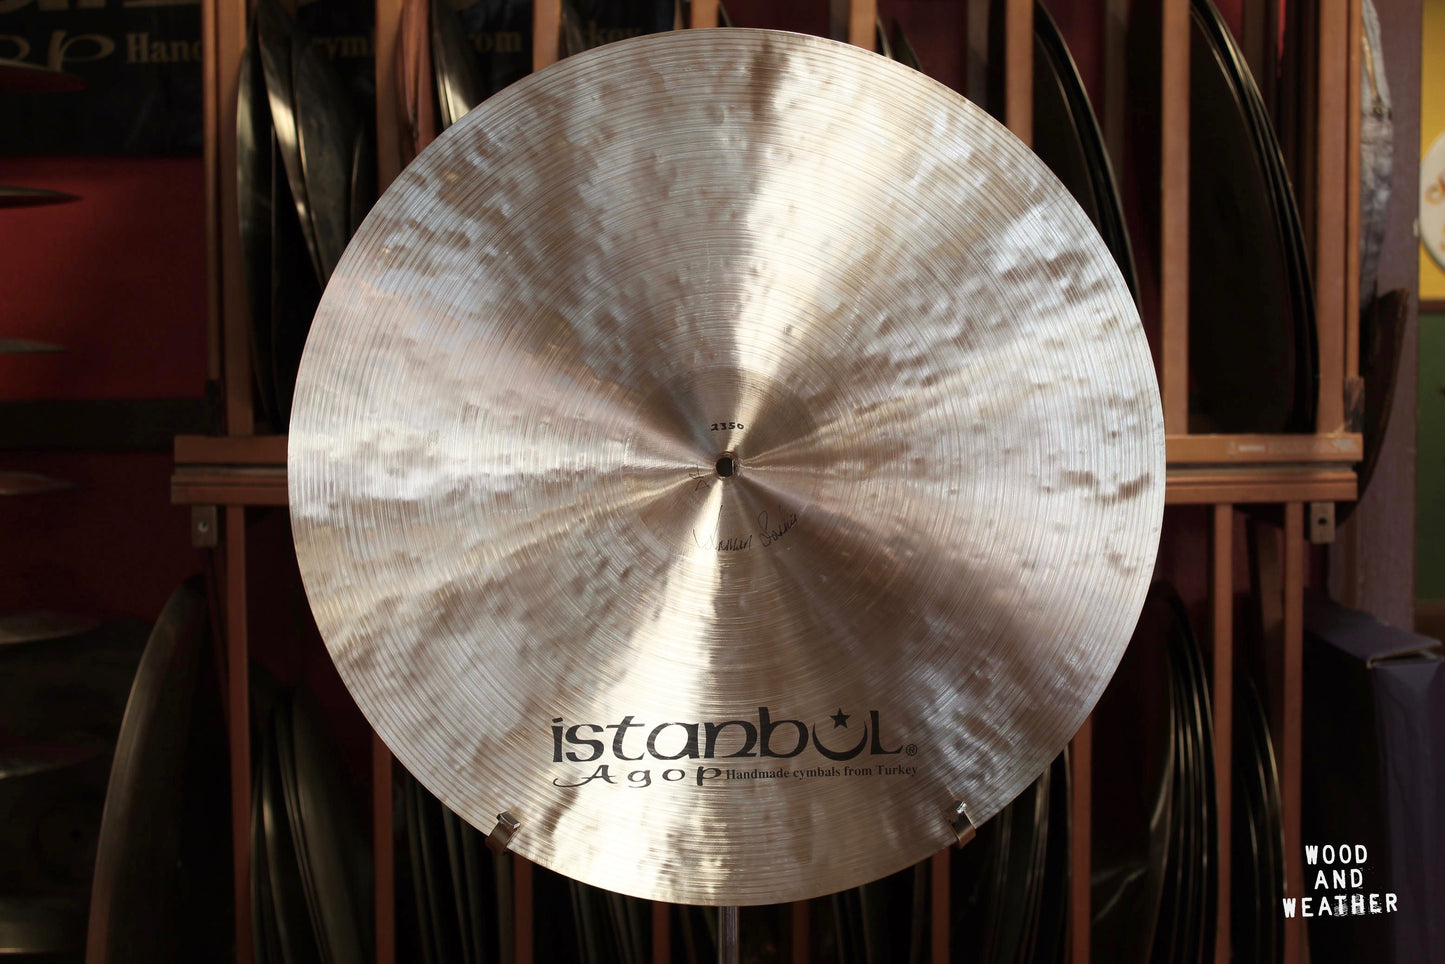 Istanbul Agop 22" Traditional Series Dark Ride Cymbal 2350g